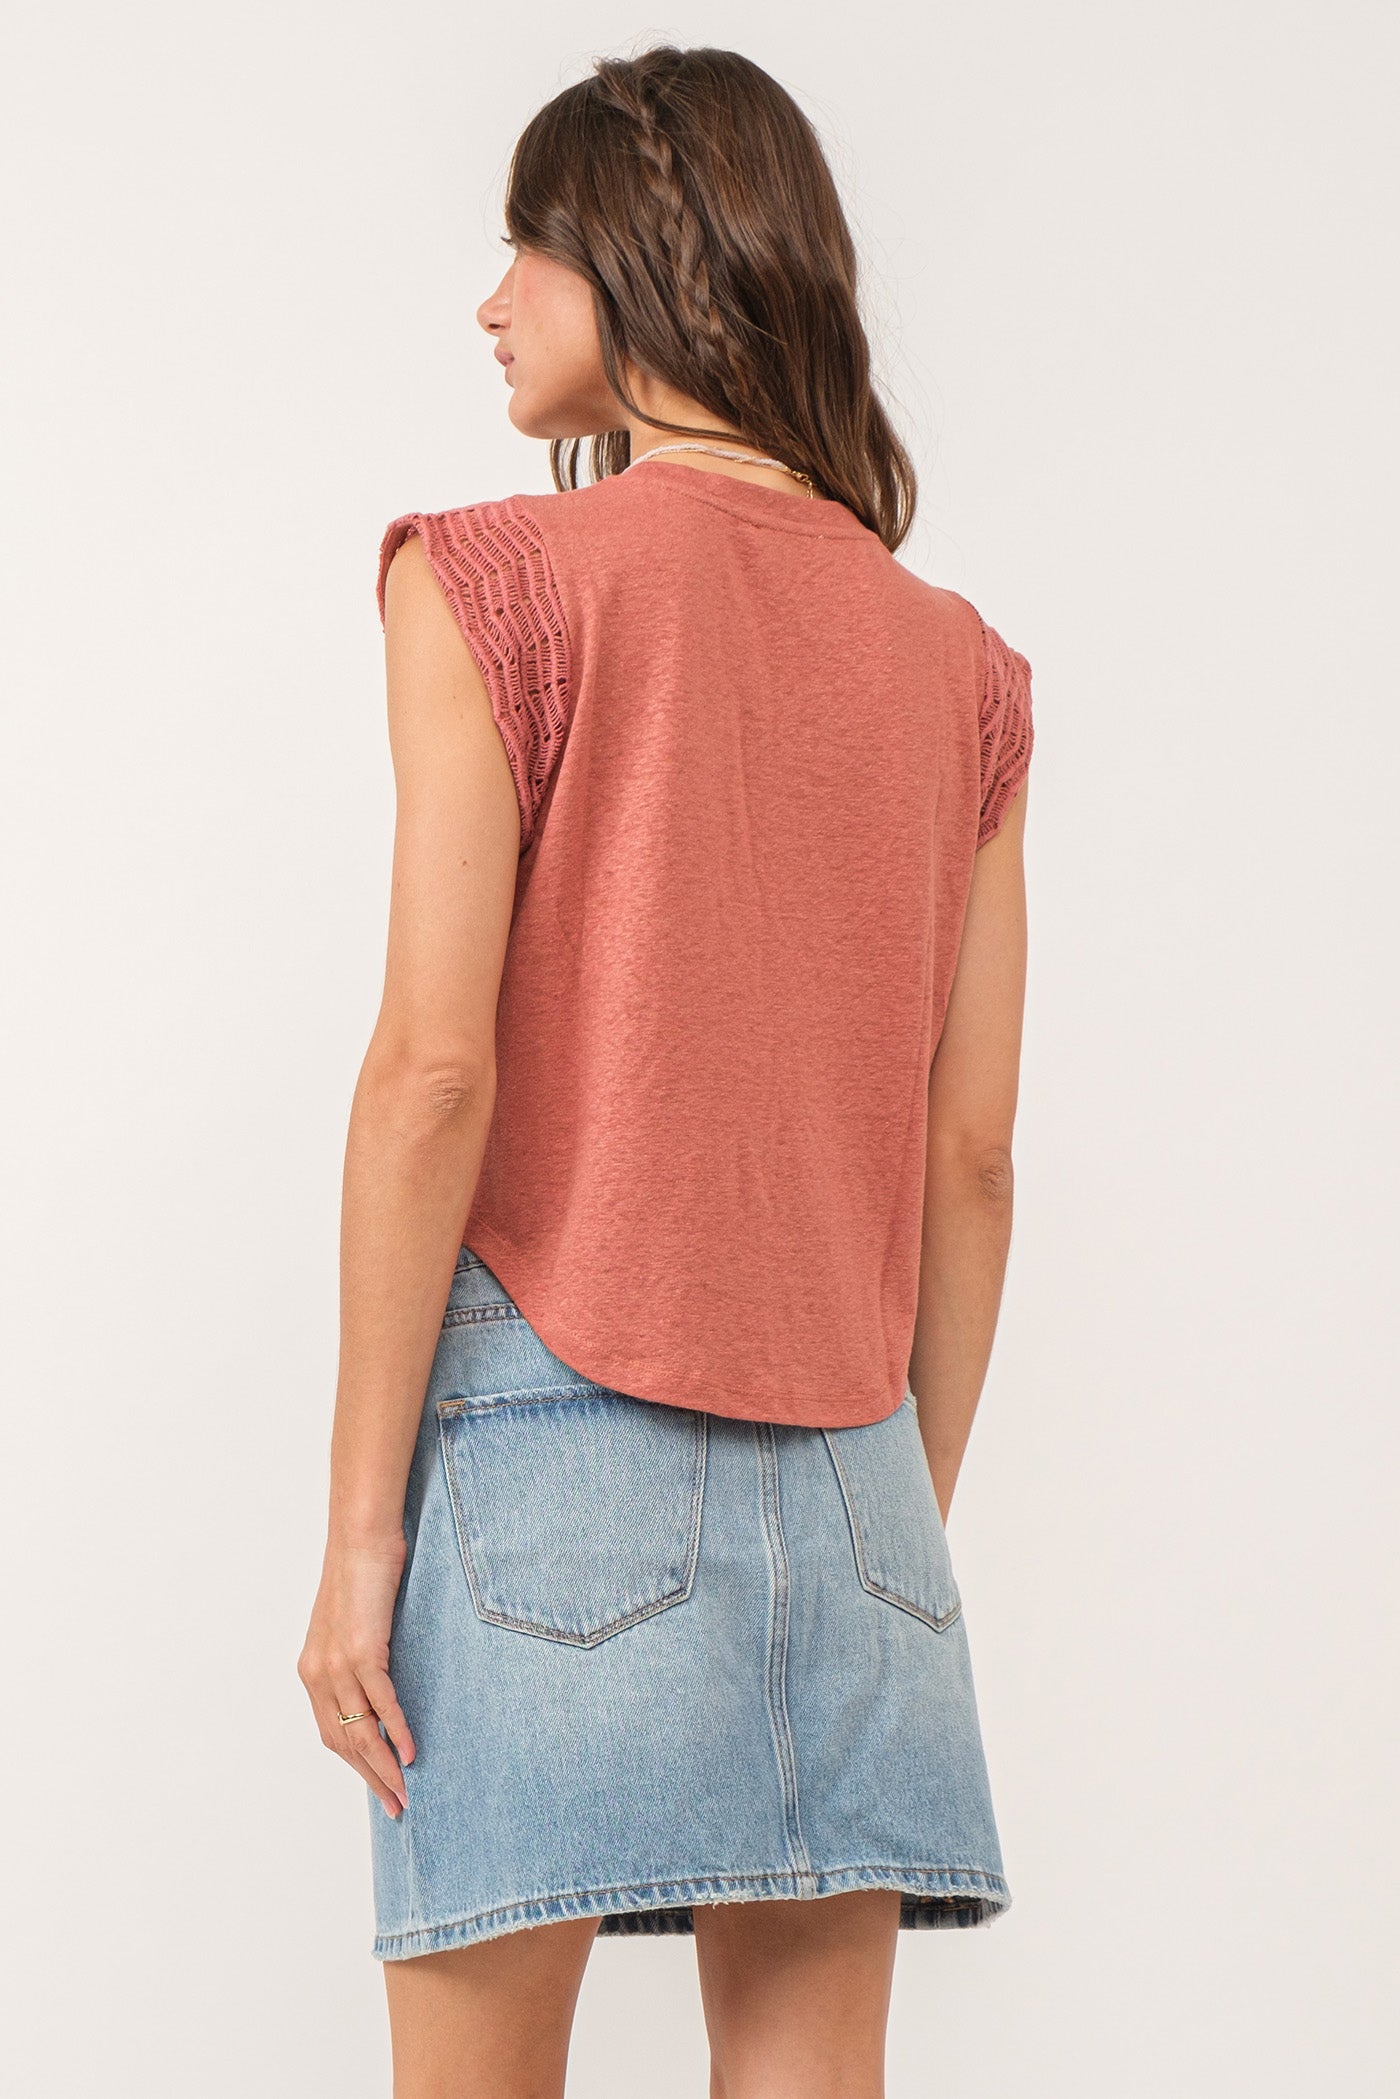 daria-crochet-trimmed-top-red-clay